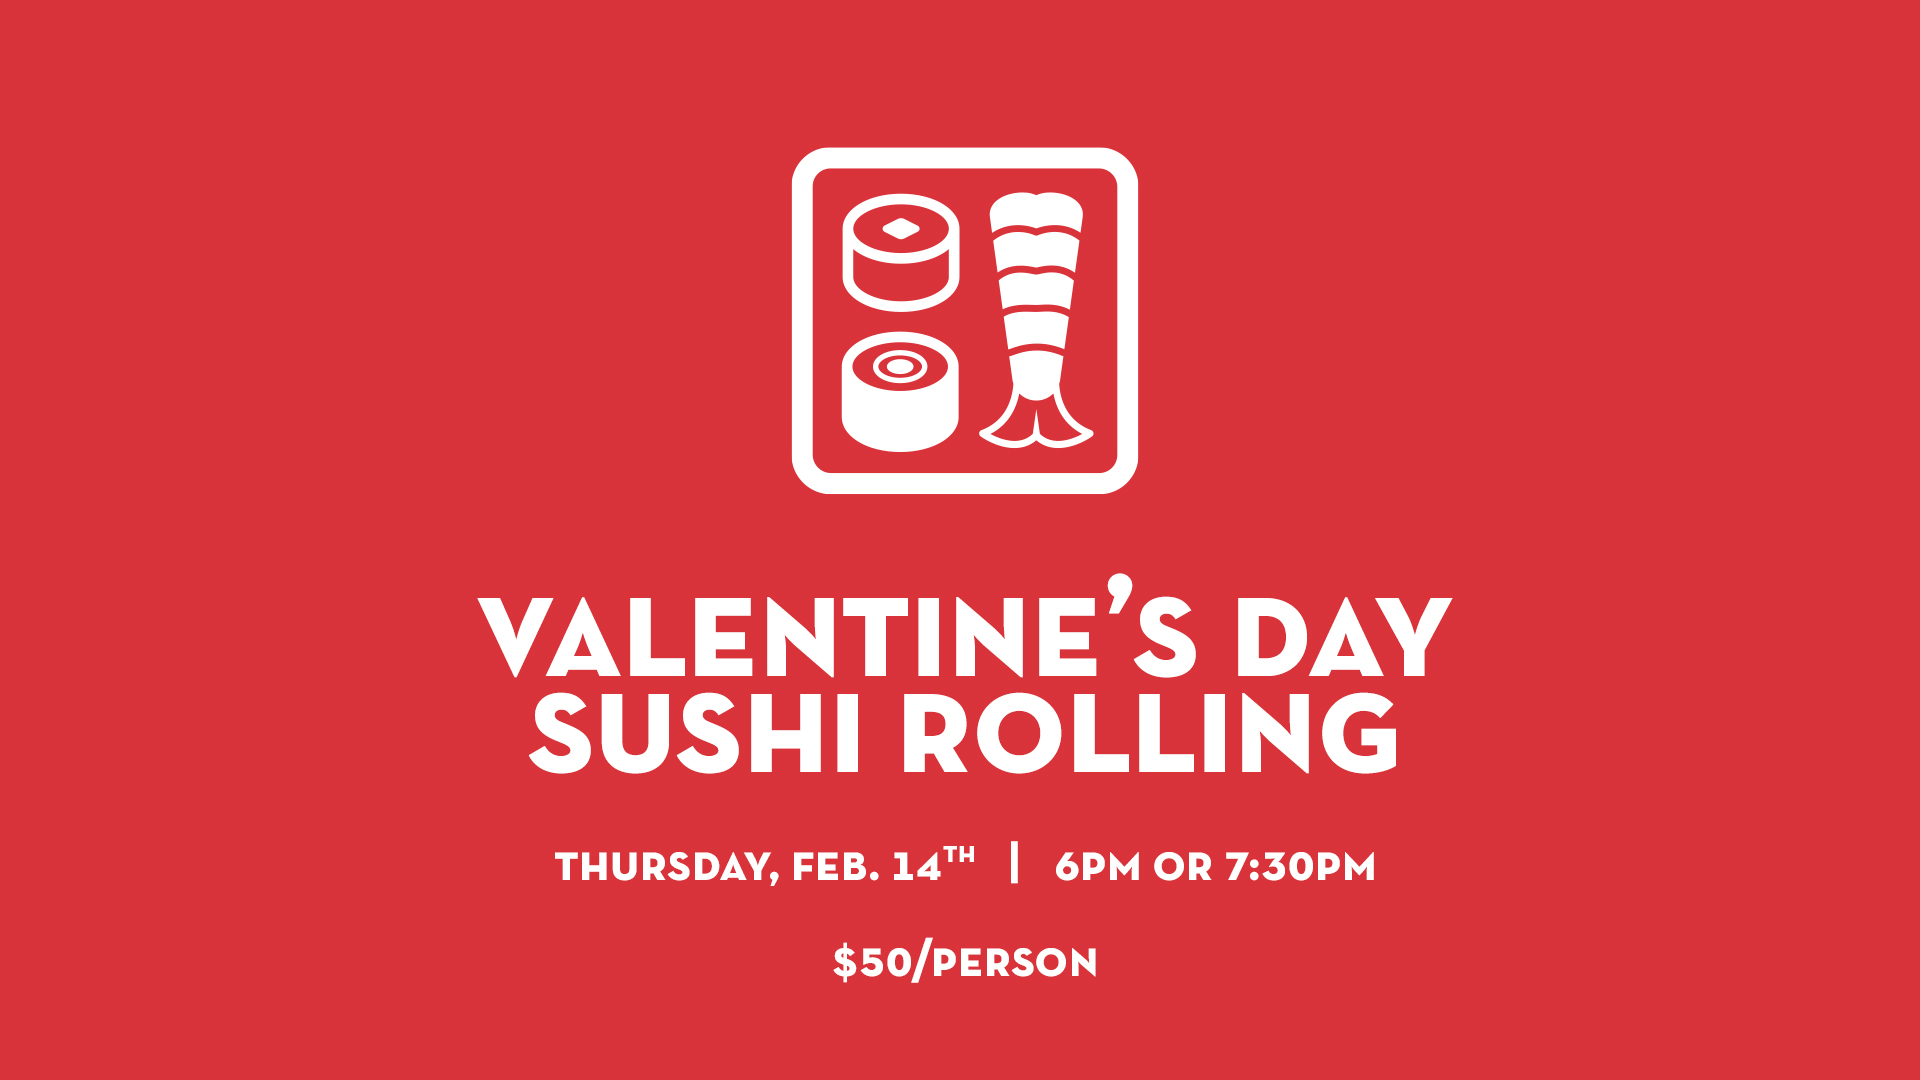 Valentine's Day Sushi Rolling